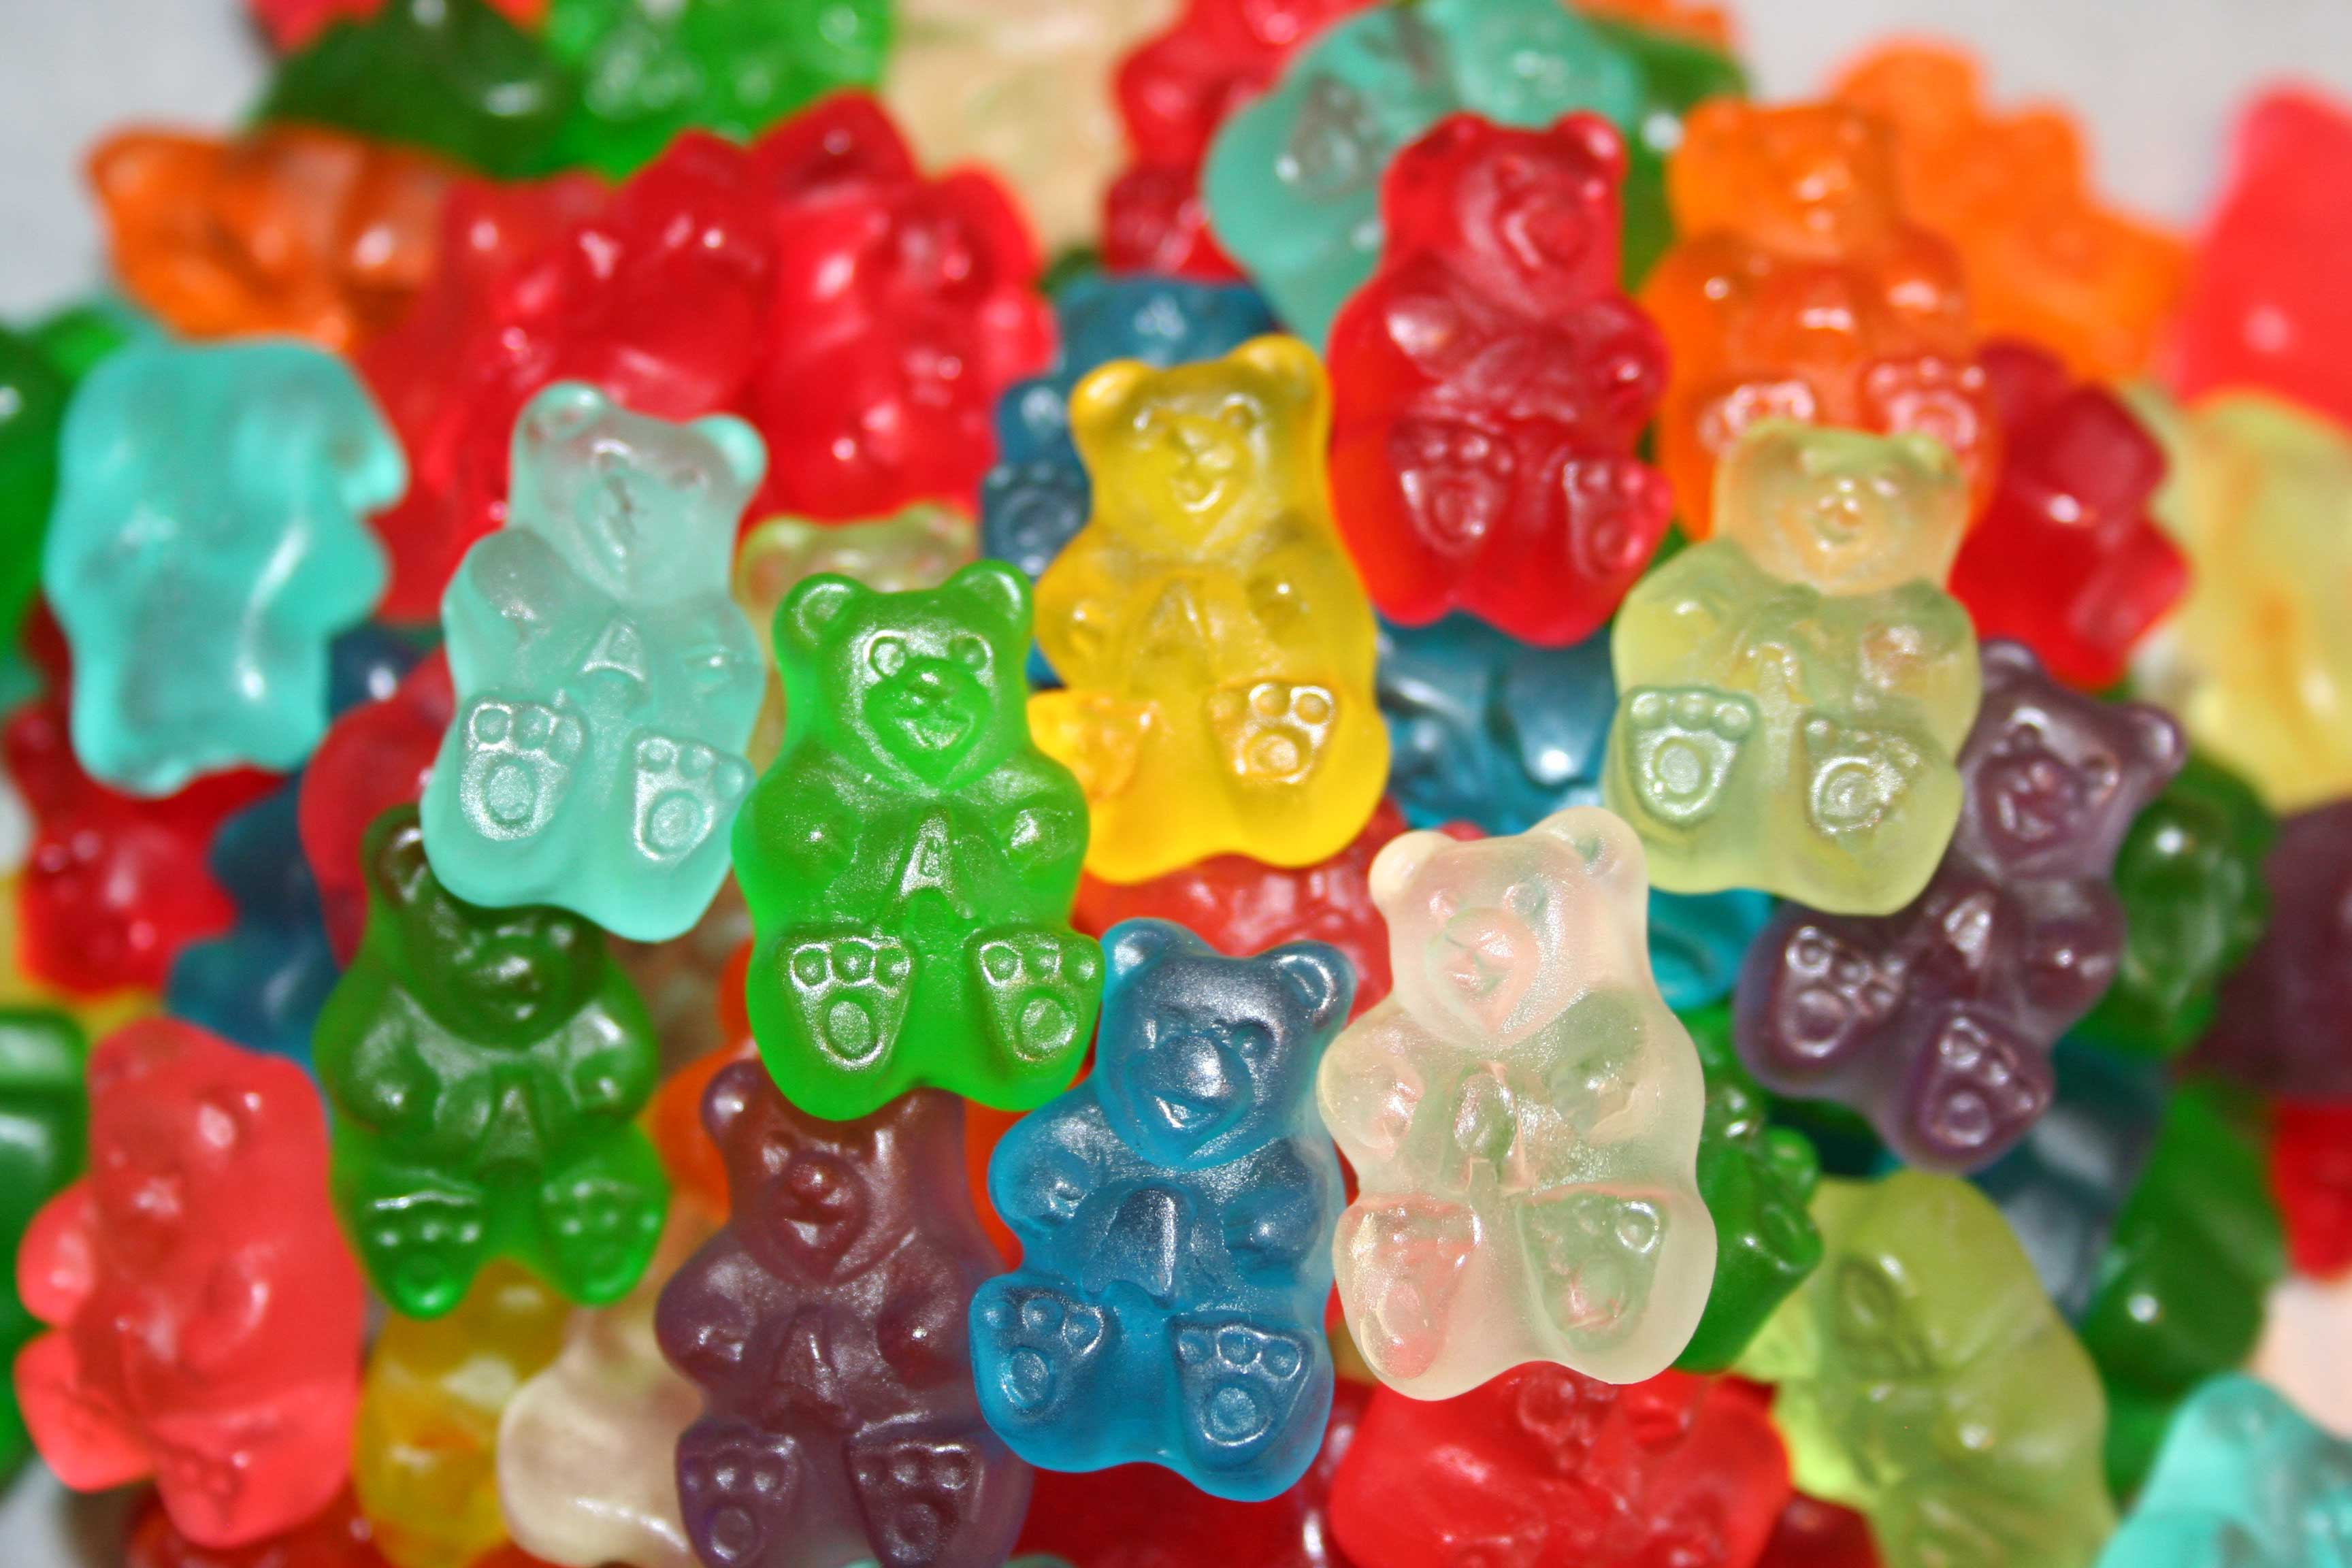 Free Colorful Gummy Bears Wallpaper, Free Colorful Gummy Bears HD